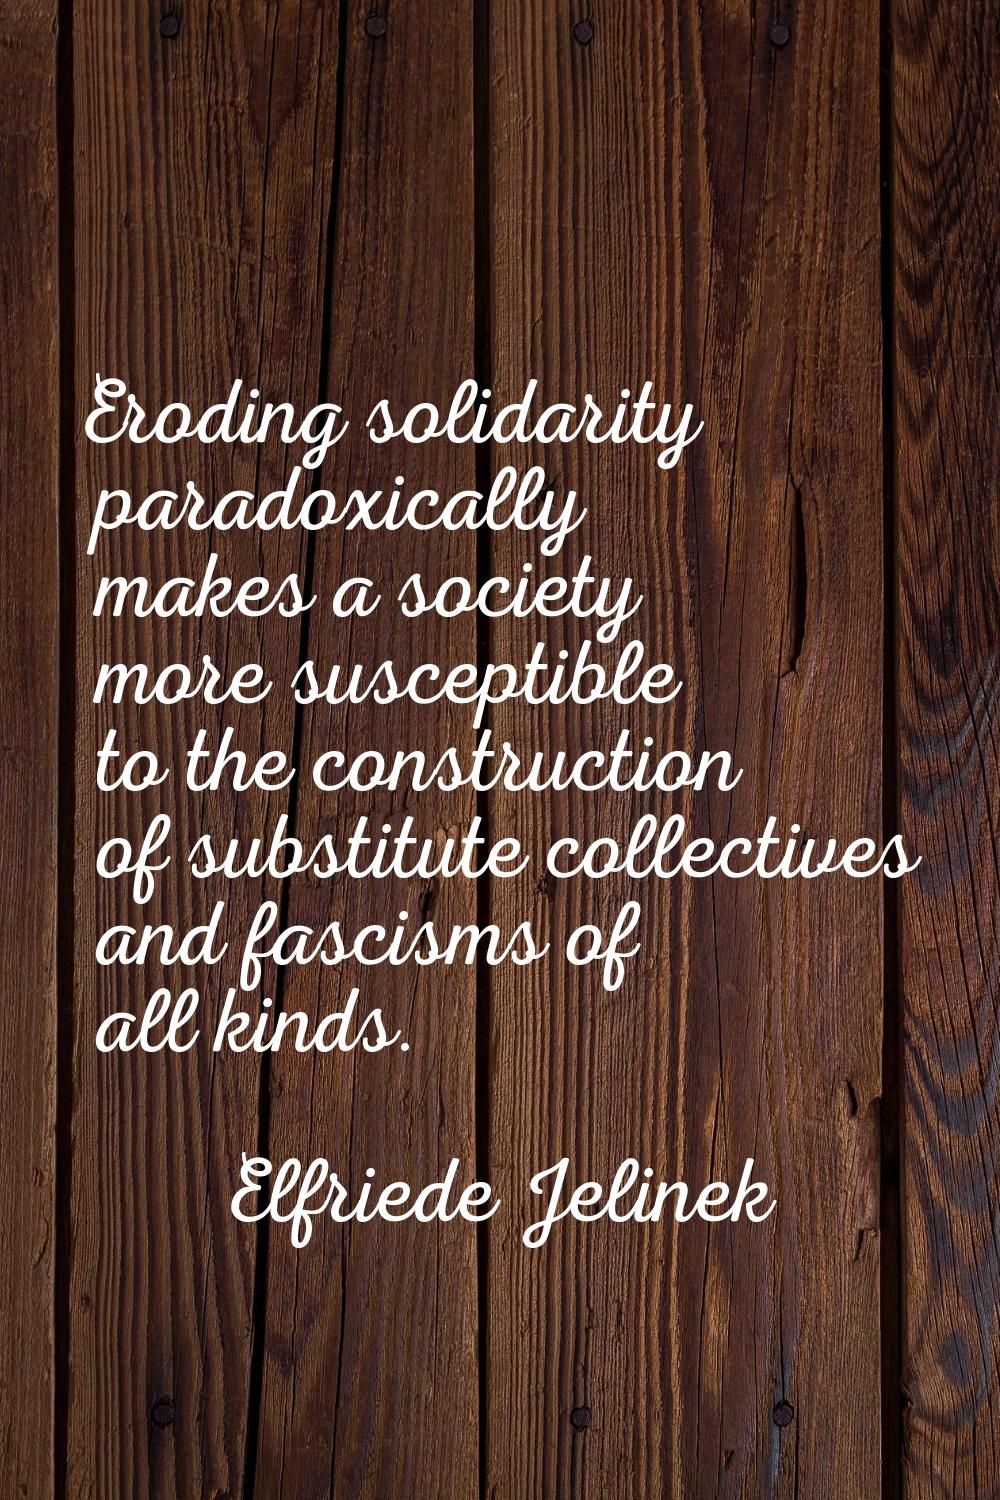 Eroding solidarity paradoxically makes a society more susceptible to the construction of substitute